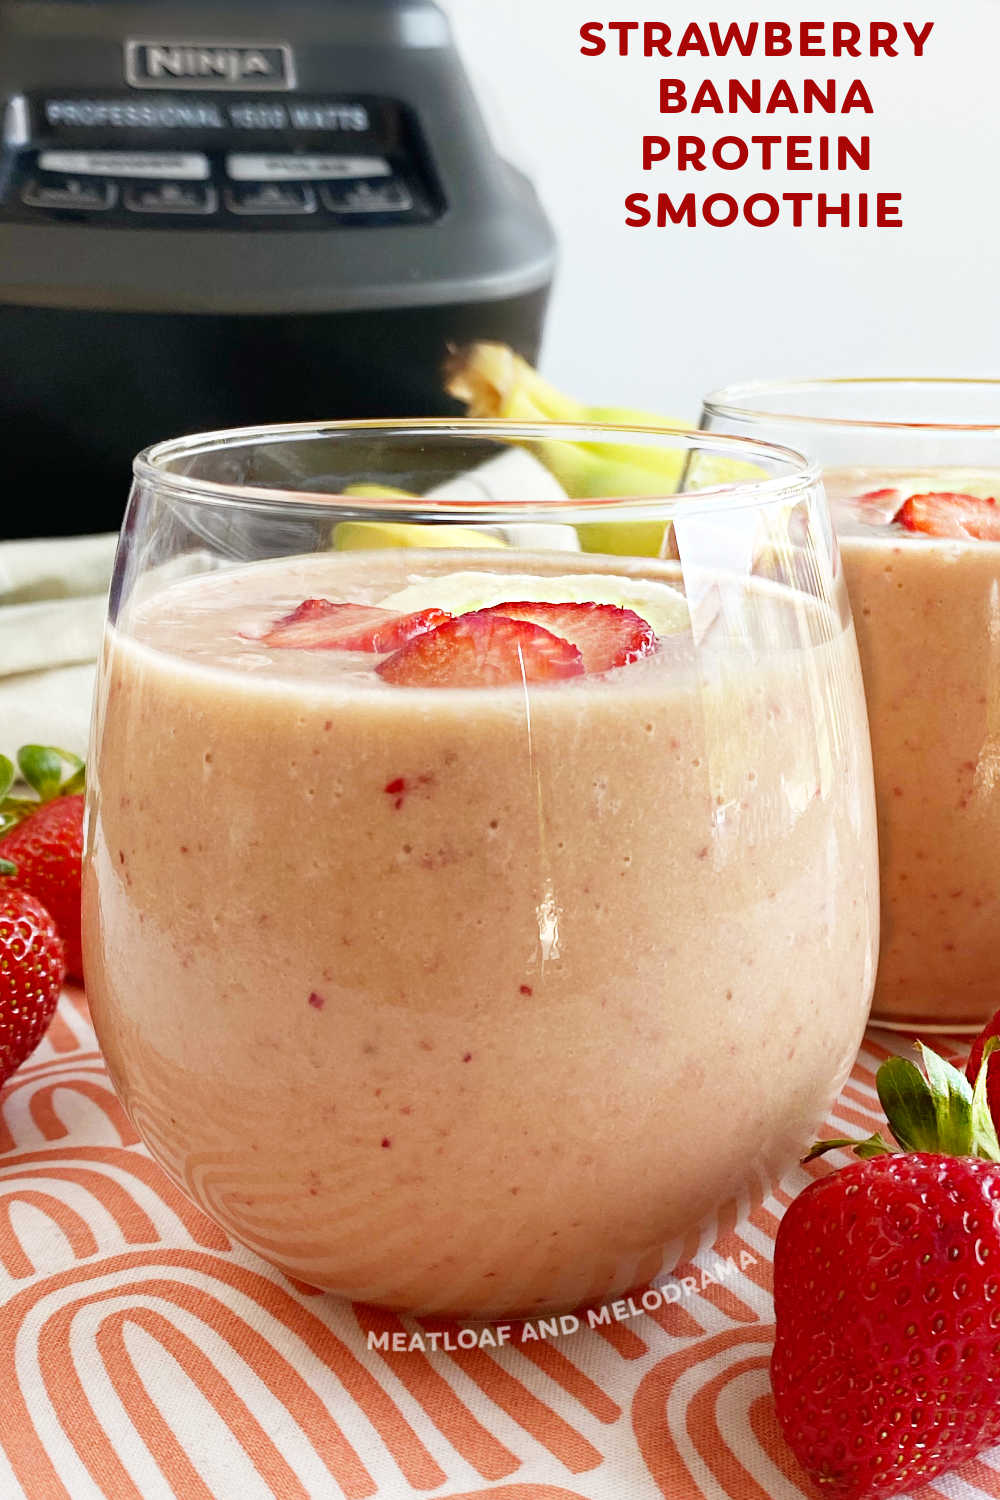 This Strawberry Banana Smoothie recipe made with peanut powder and without yogurt is a delicious protein packed plant based breakfast or afternoon snack. Use oat milk or almond milk to keep this fruit smoothie dairy free or regular milk, if you prefer. via @meamel